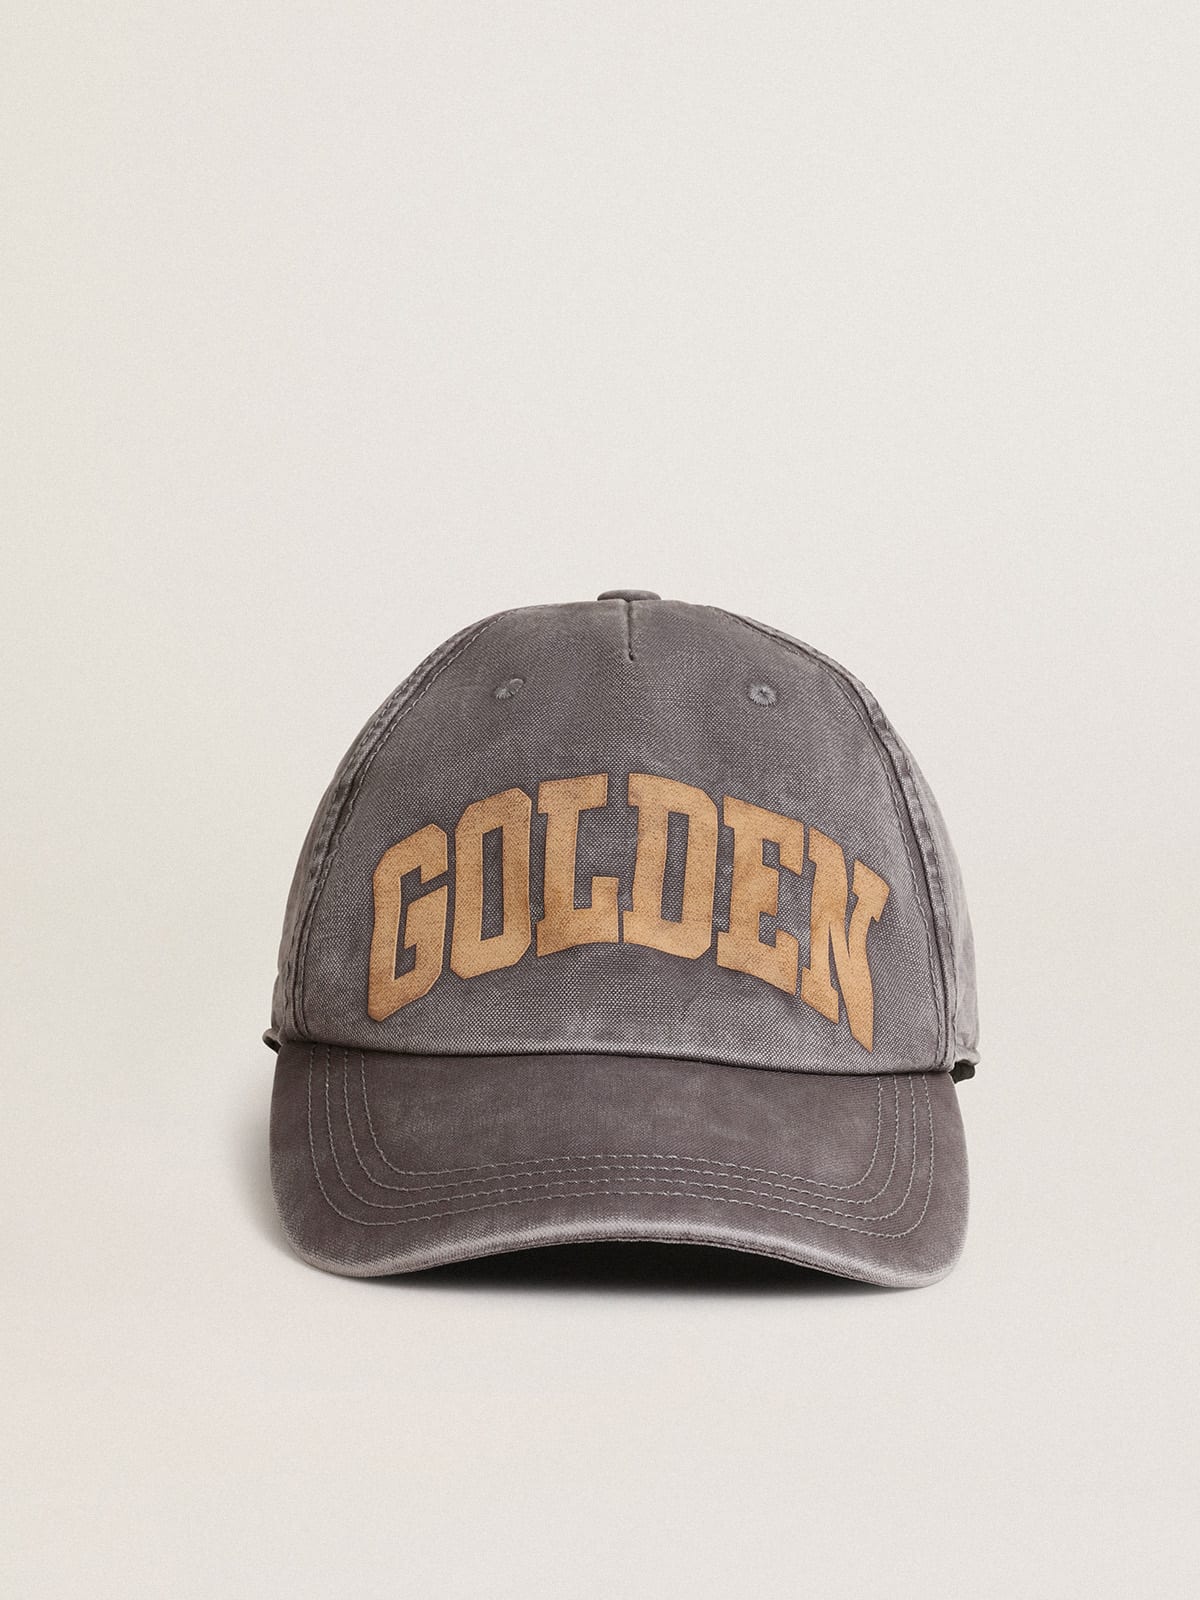 Hat in lilac-gray cotton with Golden lettering on the front